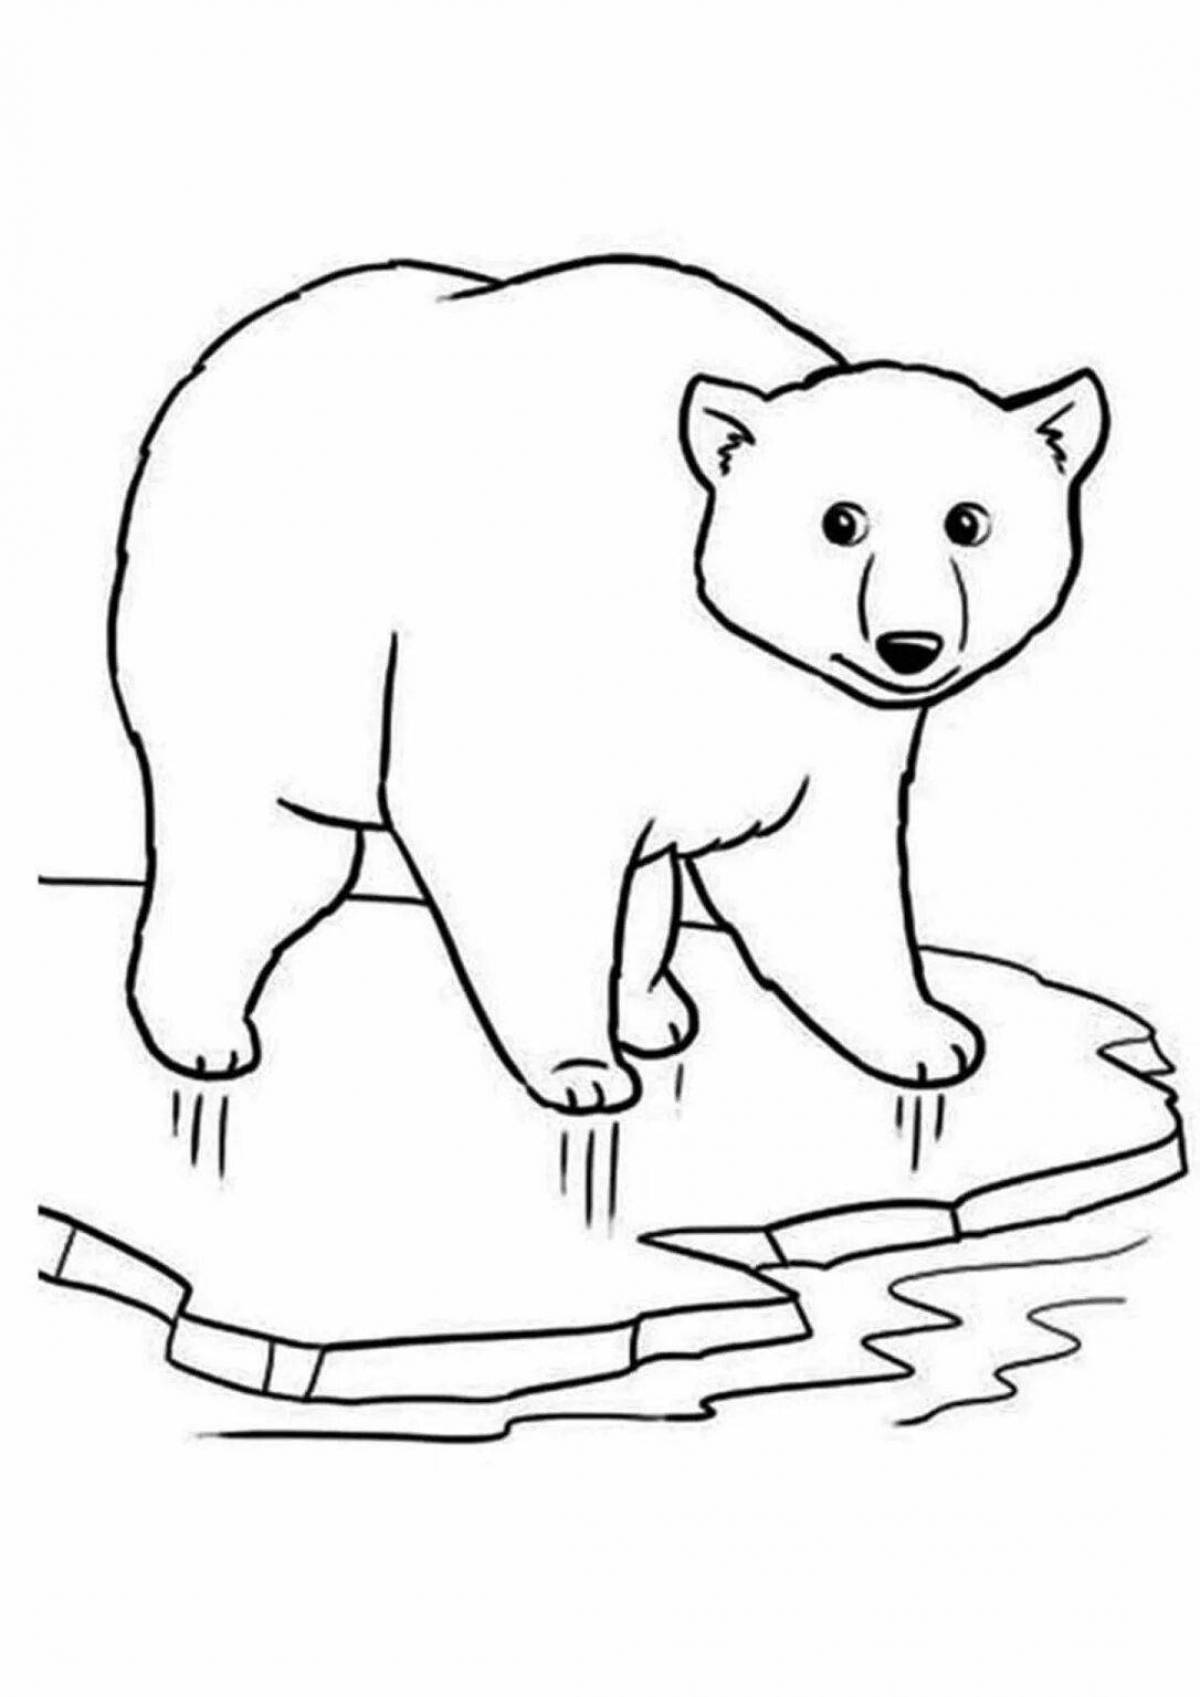 Fabulous polar bear coloring book for children 3-4 years old